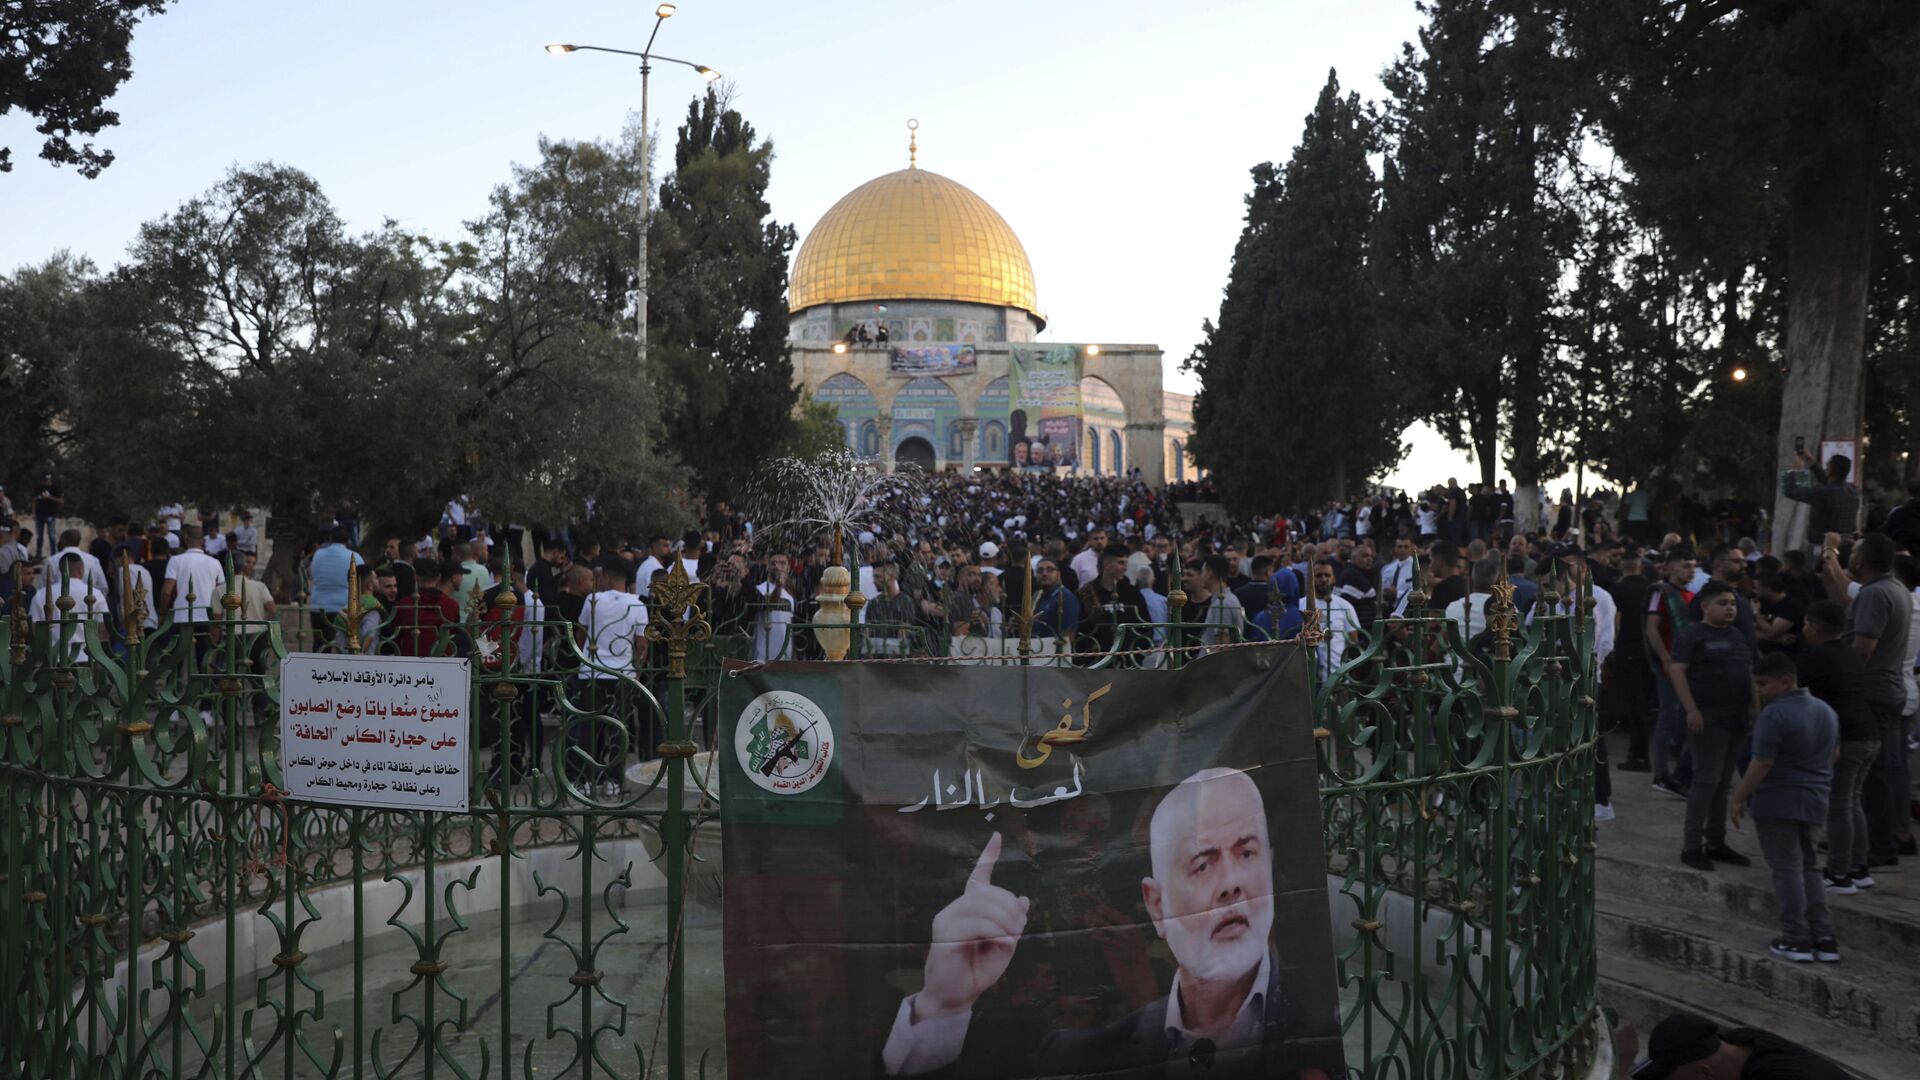 A banner depicting Hamas' supreme leader Ismail Haniyeh is on display as Muslims gather for Eid al-Fitr prayers at the Dome of the Rock Mosque in the Al-Aqsa Mosque compound in the Old City of Jerusalem, Thursday, May 13, 2021. - Sputnik International, 1920, 01.05.2022